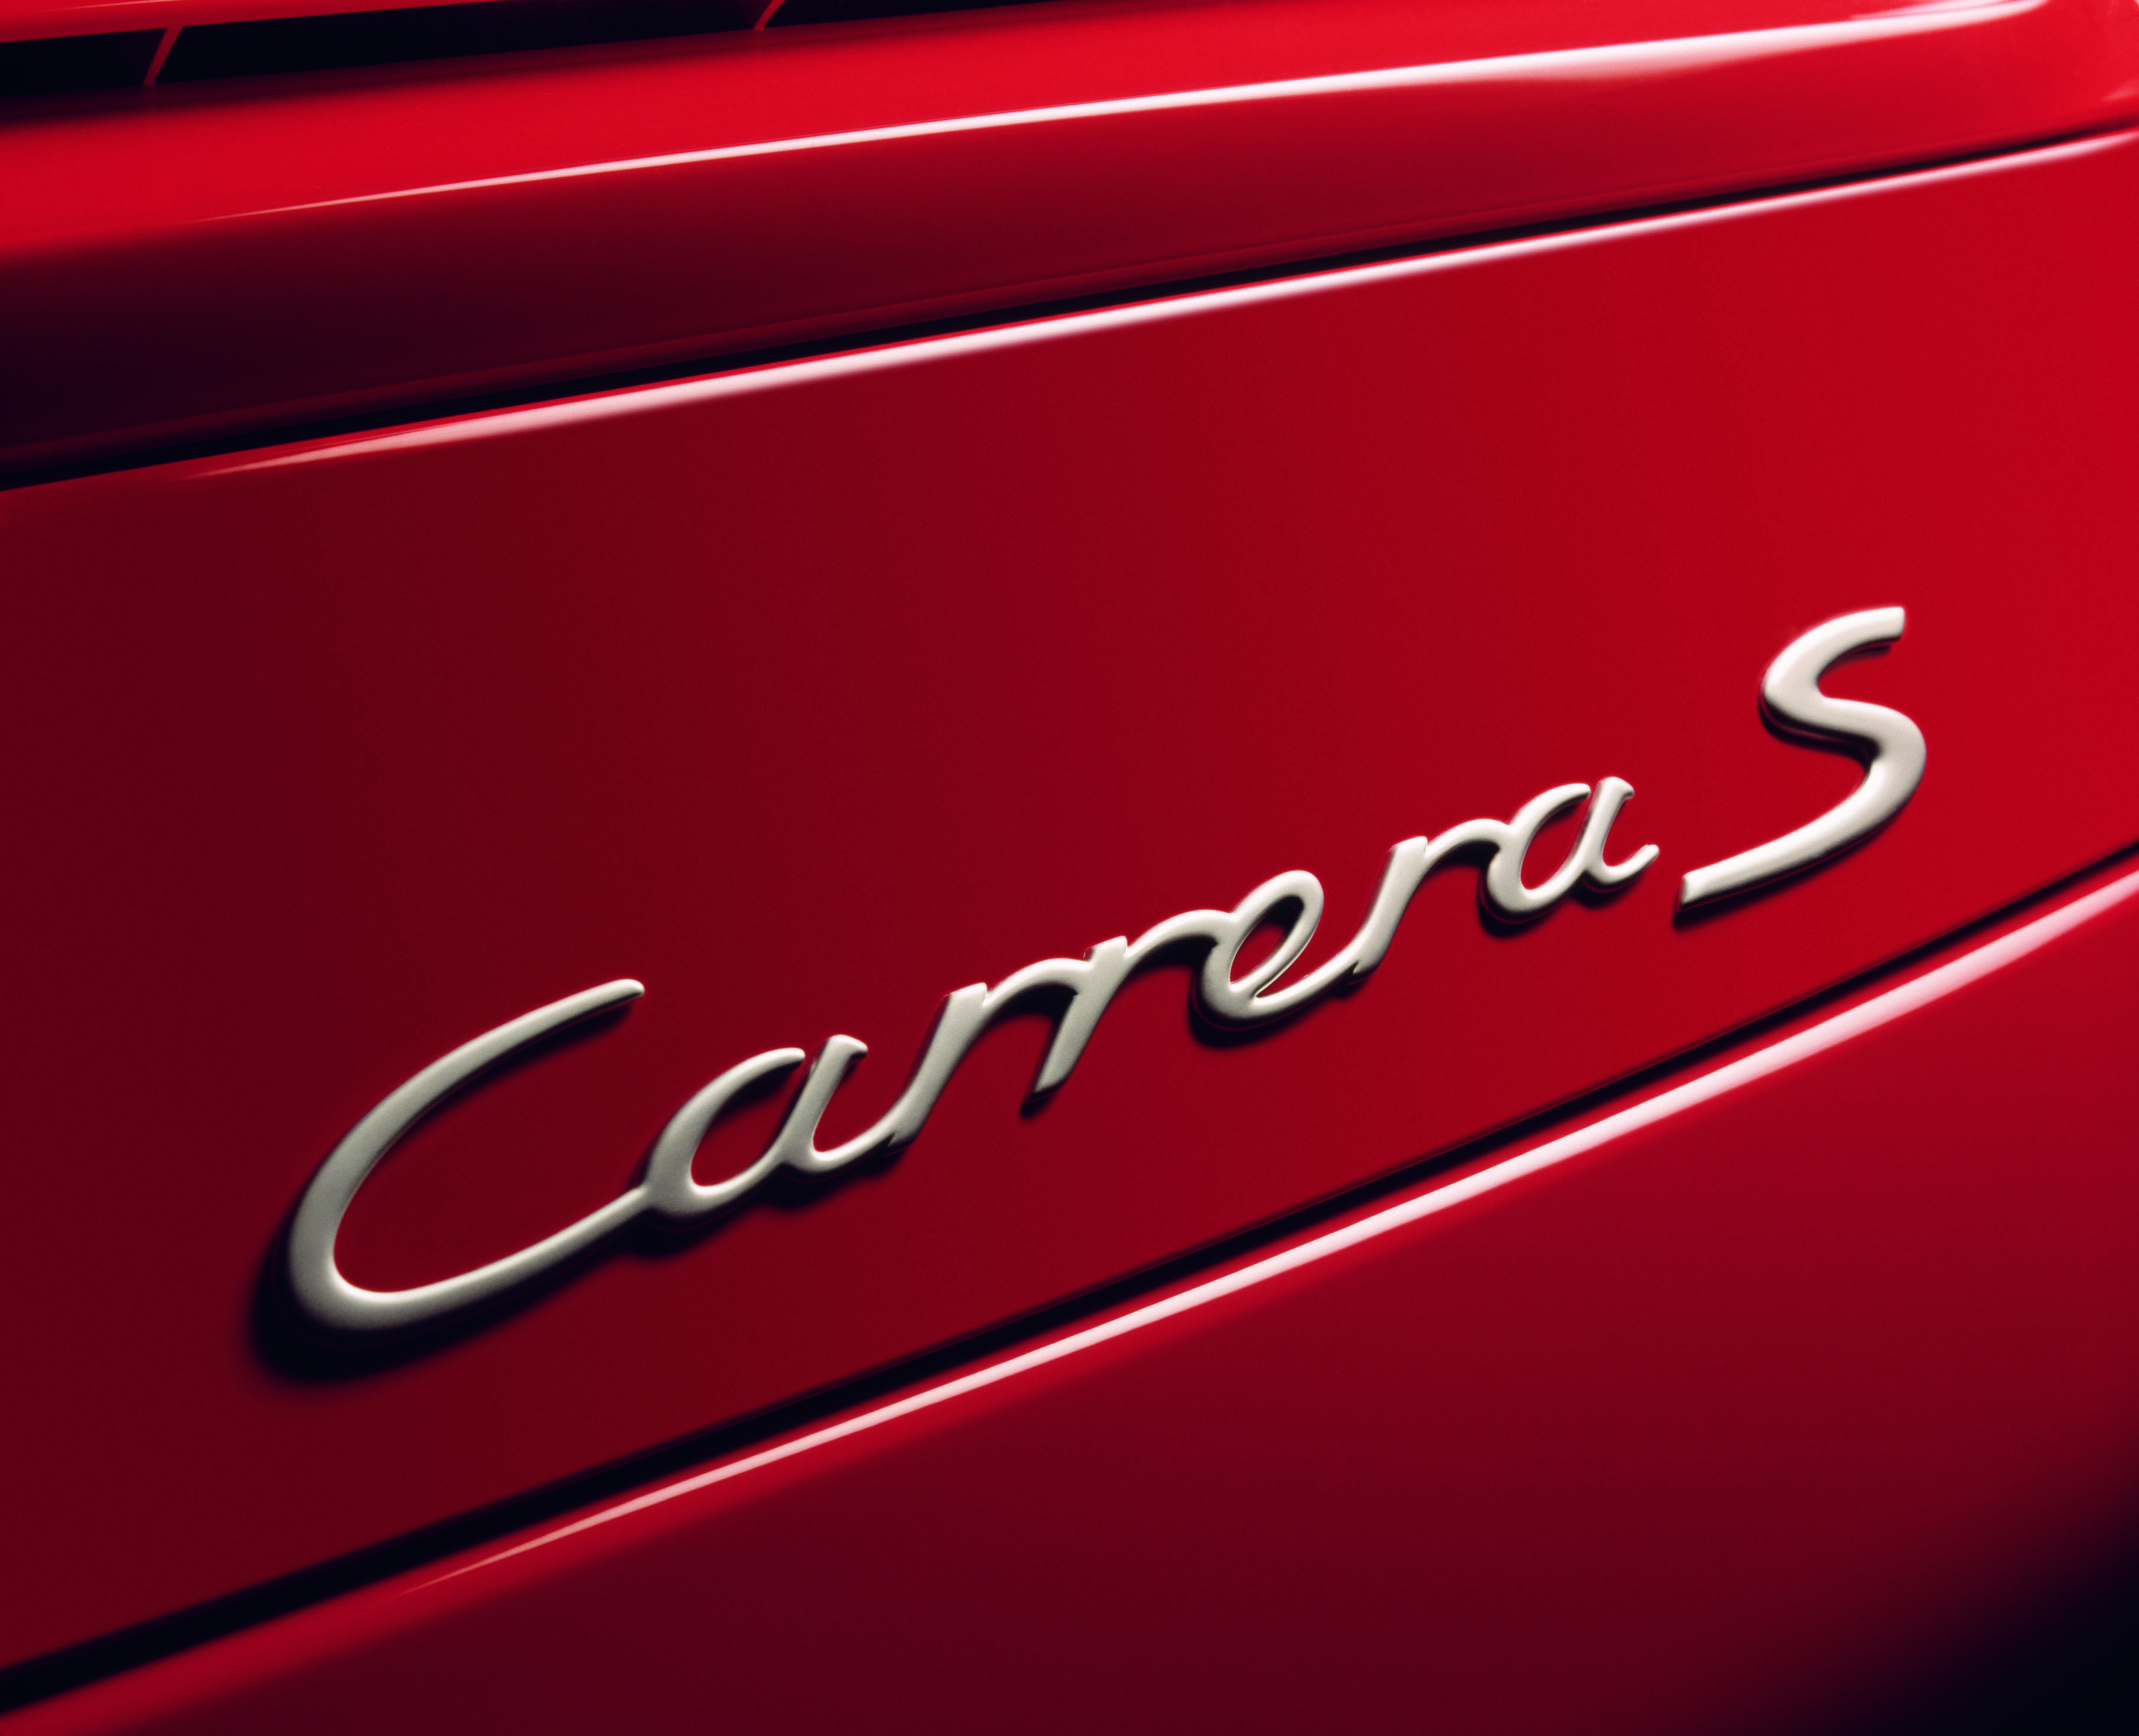 Close-up picture of a Porsche 911 Carrera S badge on the back of car